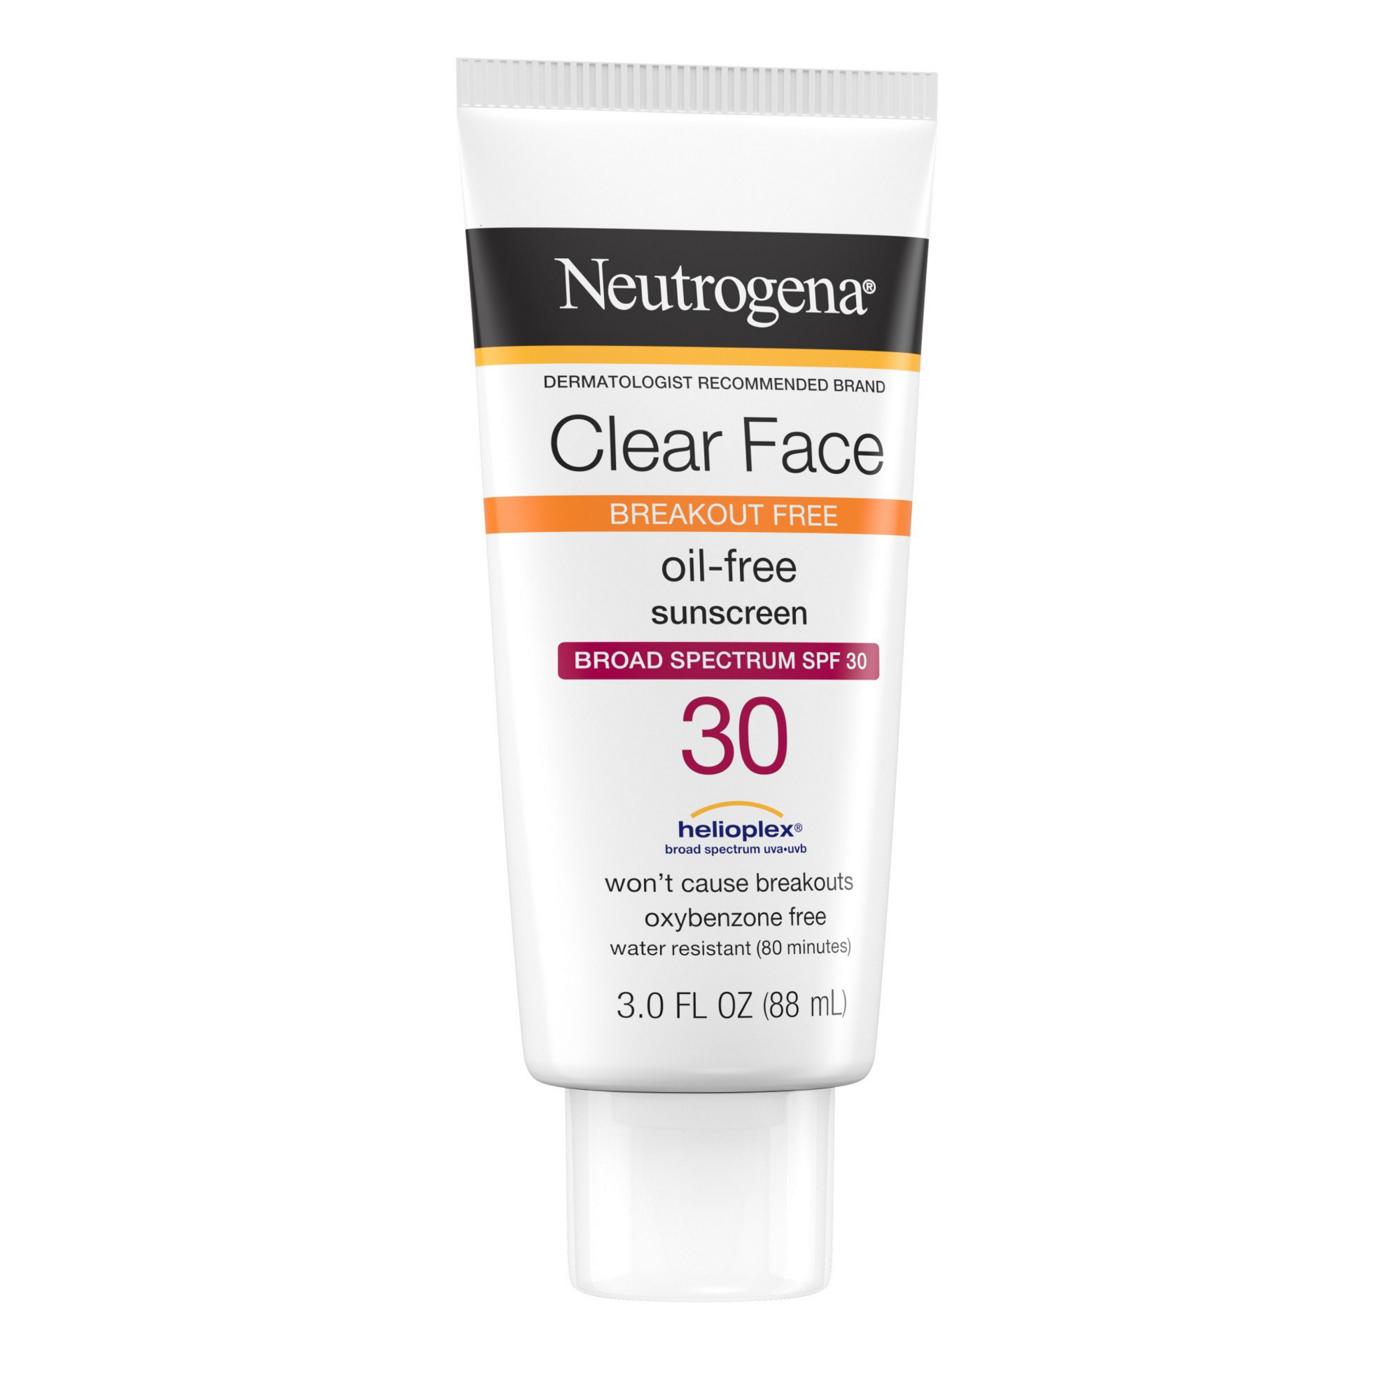 Neutrogena Clear Face Oil-Free Sunscreen Lotion - SPF 30; image 2 of 7